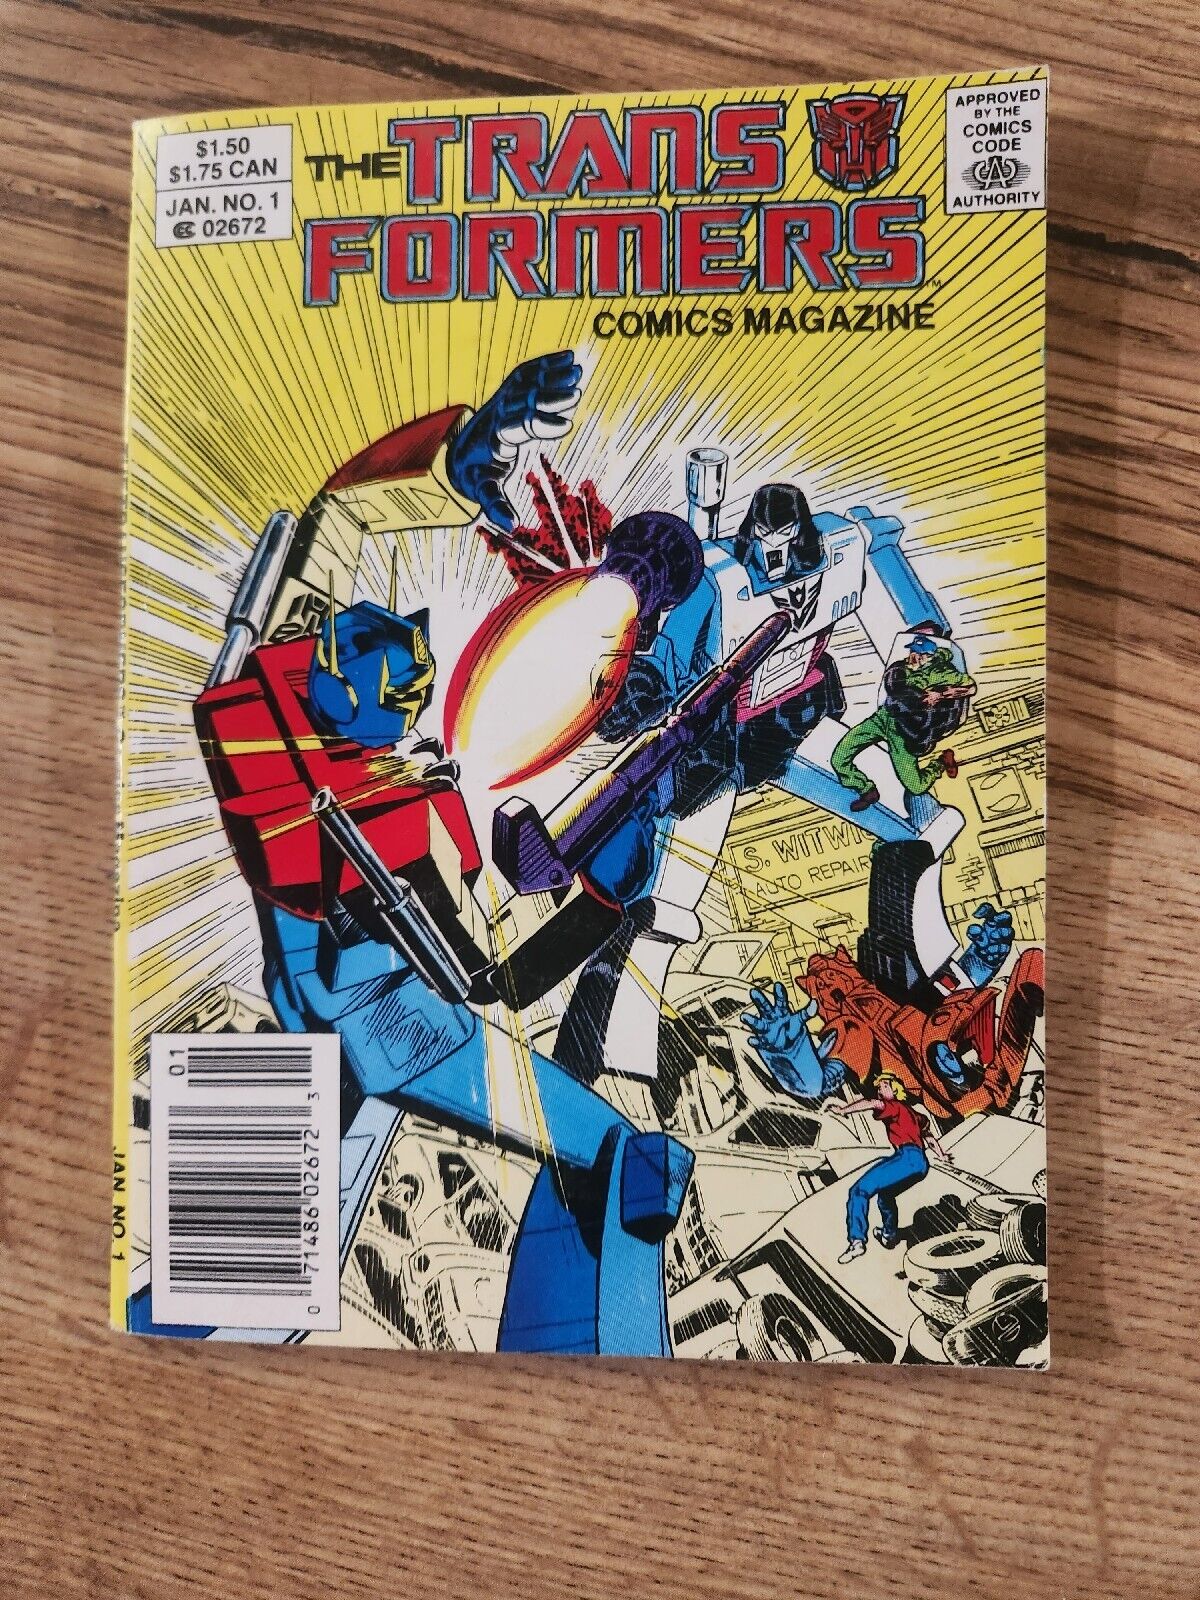 Marvel’s THE TRANSFORMERS Comics Magazine Digest Size Issue #1 Jan 1987